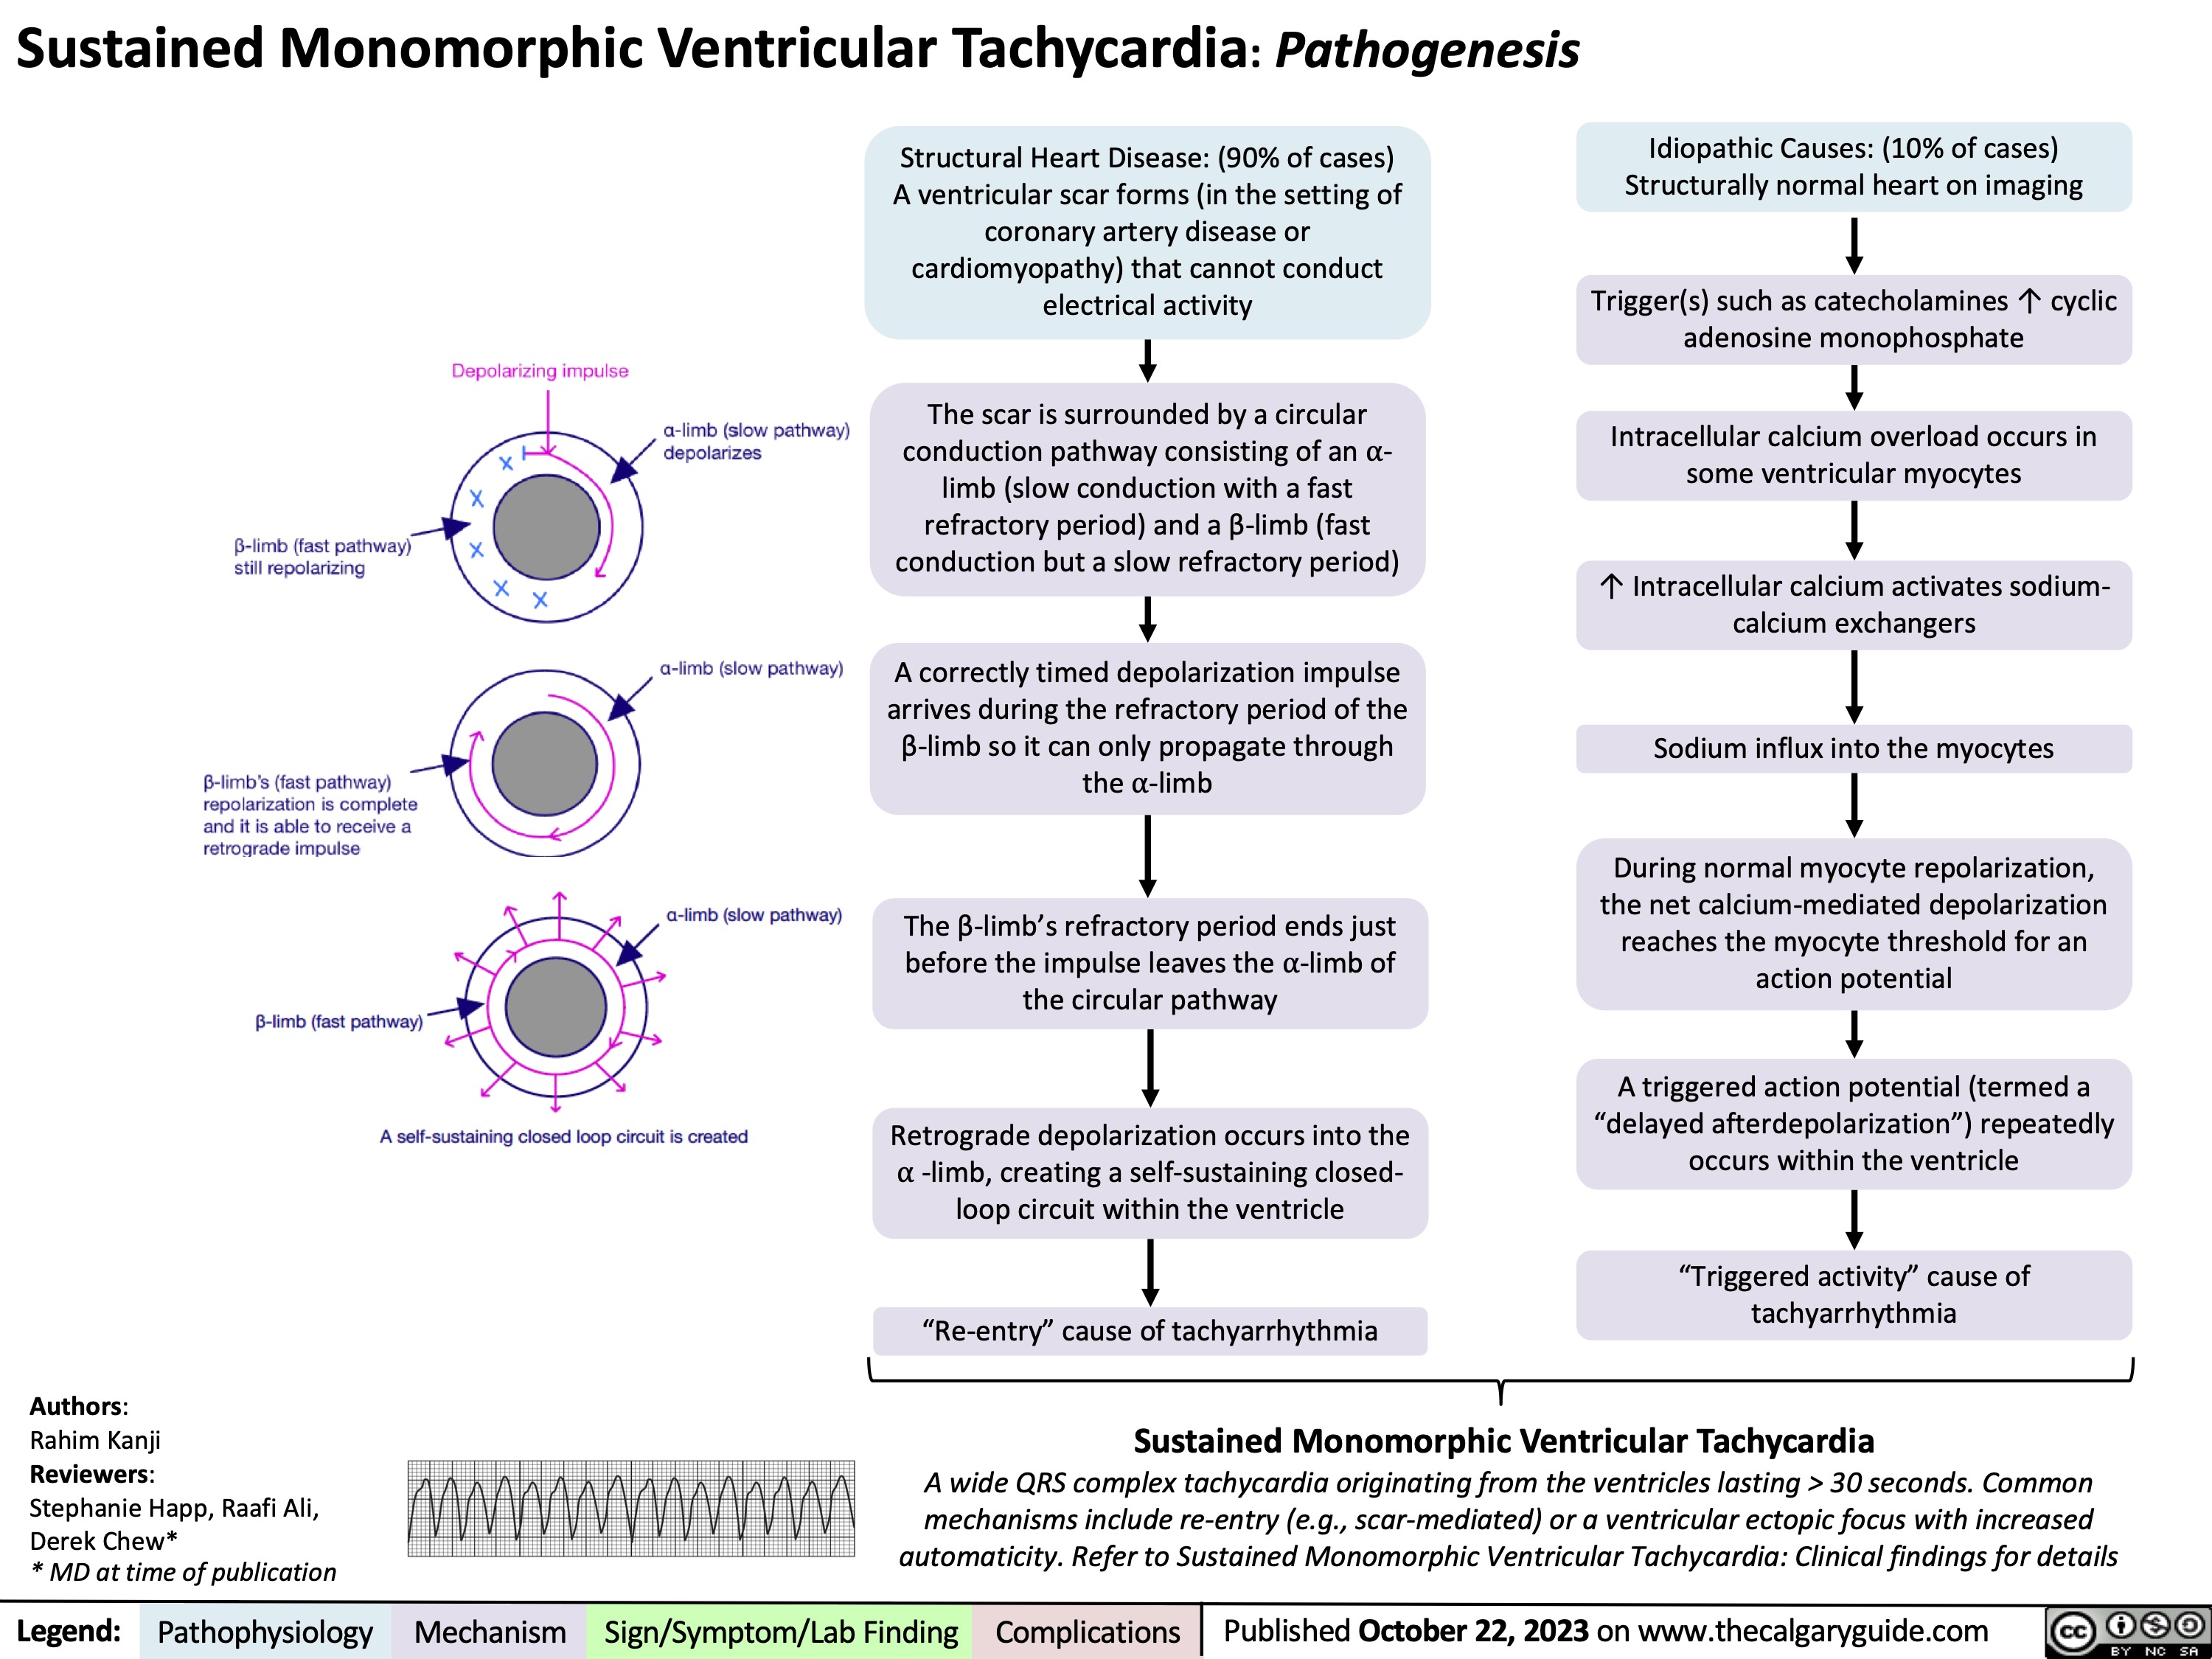 Sustained Monomorphic Ventricular Tachycardia: Pathogenesis
  Structural Heart Disease: (90% of cases) A ventricular scar forms (in the setting of coronary artery disease or cardiomyopathy) that cannot conduct electrical activity
The scar is surrounded by a circular conduction pathway consisting of an ⍺- limb (slow conduction with a fast refractory period) and a β-limb (fast conduction but a slow refractory period)
A correctly timed depolarization impulse arrives during the refractory period of the β-limb so it can only propagate through the ⍺-limb
The β-limb’s refractory period ends just before the impulse leaves the ⍺-limb of the circular pathway
Retrograde depolarization occurs into the ⍺ -limb, creating a self-sustaining closed- loop circuit within the ventricle
“Re-entry” cause of tachyarrhythmia
Idiopathic Causes: (10% of cases) Structurally normal heart on imaging
Trigger(s) such as catecholamines ↑ cyclic adenosine monophosphate
Intracellular calcium overload occurs in some ventricular myocytes
↑ Intracellular calcium activates sodium- calcium exchangers
Sodium influx into the myocytes
During normal myocyte repolarization, the net calcium-mediated depolarization reaches the myocyte threshold for an action potential
A triggered action potential (termed a “delayed afterdepolarization”) repeatedly occurs within the ventricle
“Triggered activity” cause of tachyarrhythmia
                 Authors:
Rahim Kanji
Reviewers:
Stephanie Happ, Raafi Ali, Derek Chew*
* MD at time of publication
Sustained Monomorphic Ventricular Tachycardia
A wide QRS complex tachycardia originating from the ventricles lasting > 30 seconds. Common
mechanisms include re-entry (e.g., scar-mediated) or a ventricular ectopic focus with increased automaticity. Refer to Sustained Monomorphic Ventricular Tachycardia: Clinical findings for details
  Legend:
 Pathophysiology
Mechanism
Sign/Symptom/Lab Finding
 Complications
 Published October 22, 2023 on www.thecalgaryguide.com
   